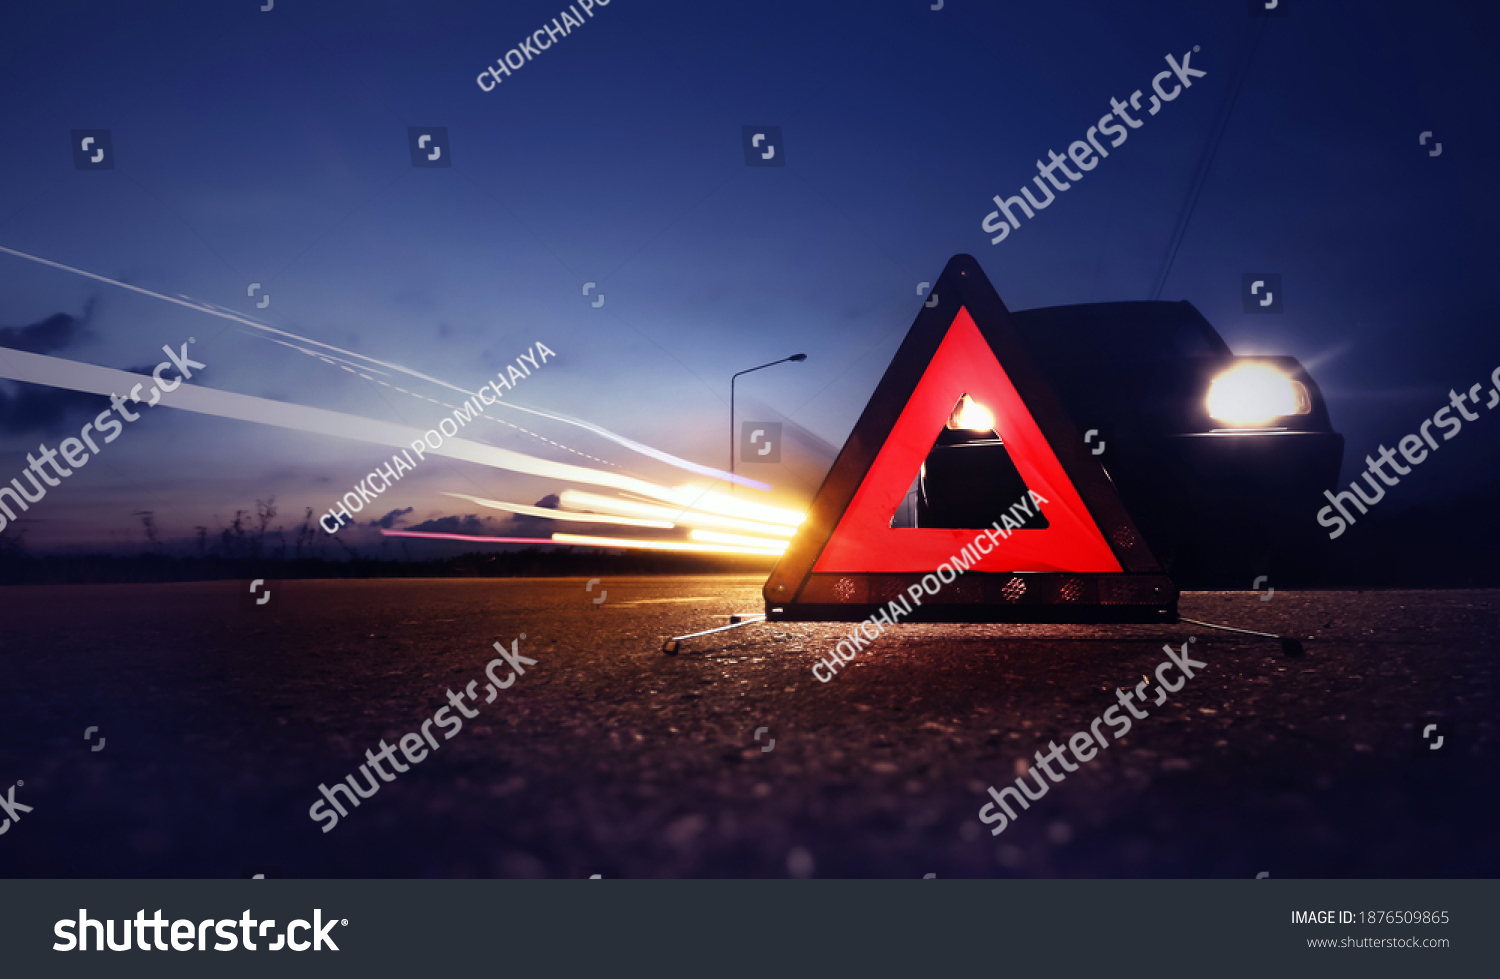 Red emergency stop sign (red triangle warning sign) with long-exposure of traffic light trails at nigh. #1876509865